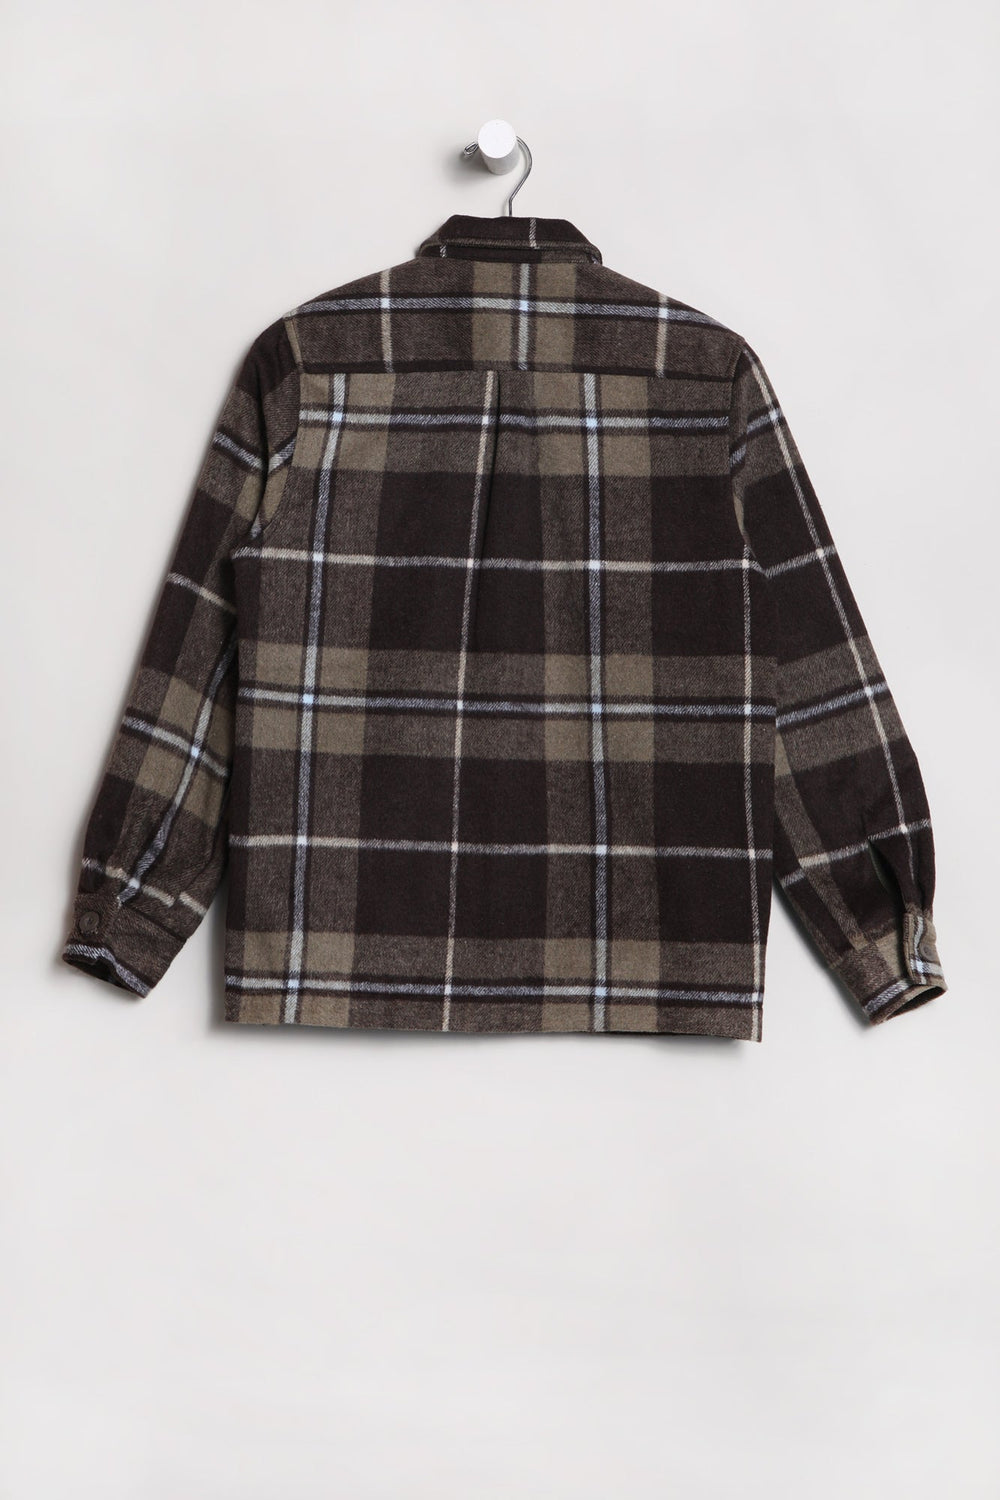 West49 Youth Plaid Shacket Brown